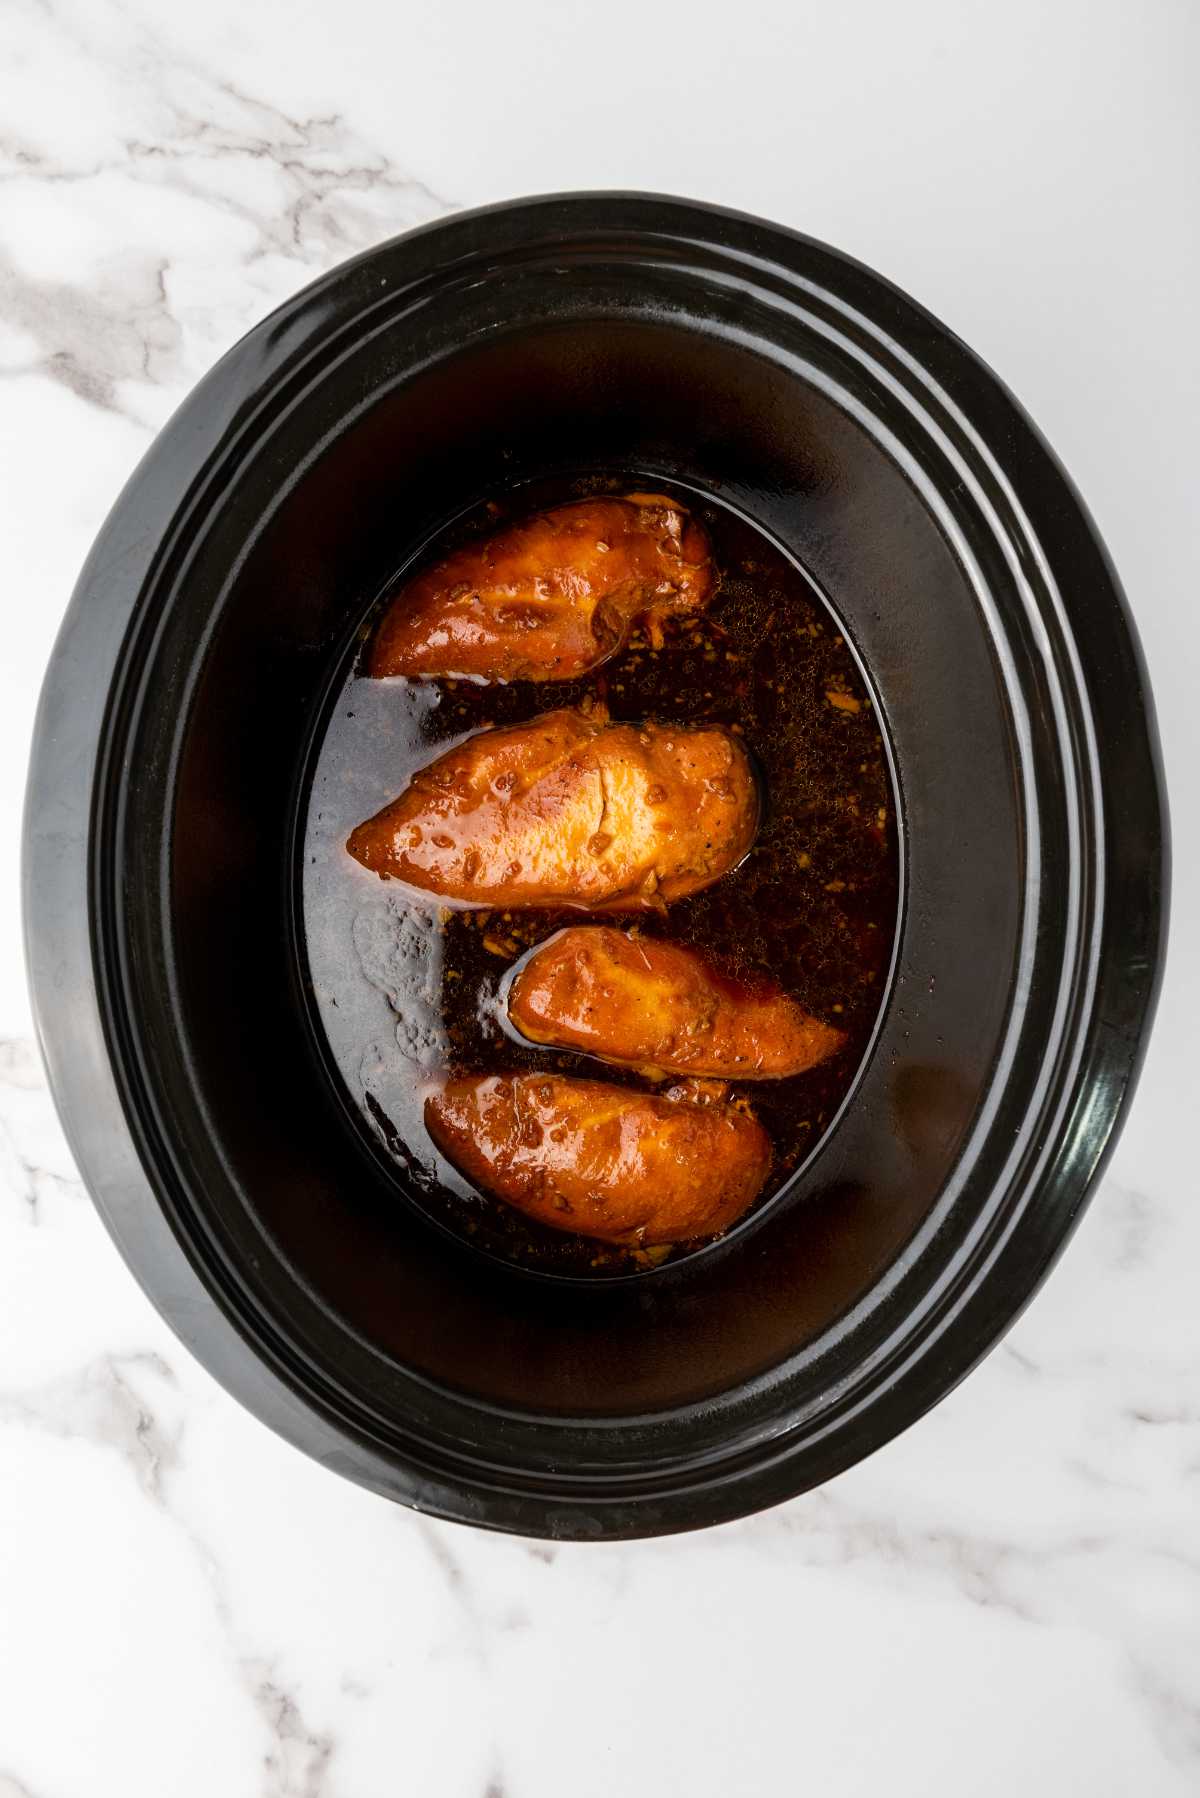 soy garlic sauce and chicken breasts cooking in a crockpot.